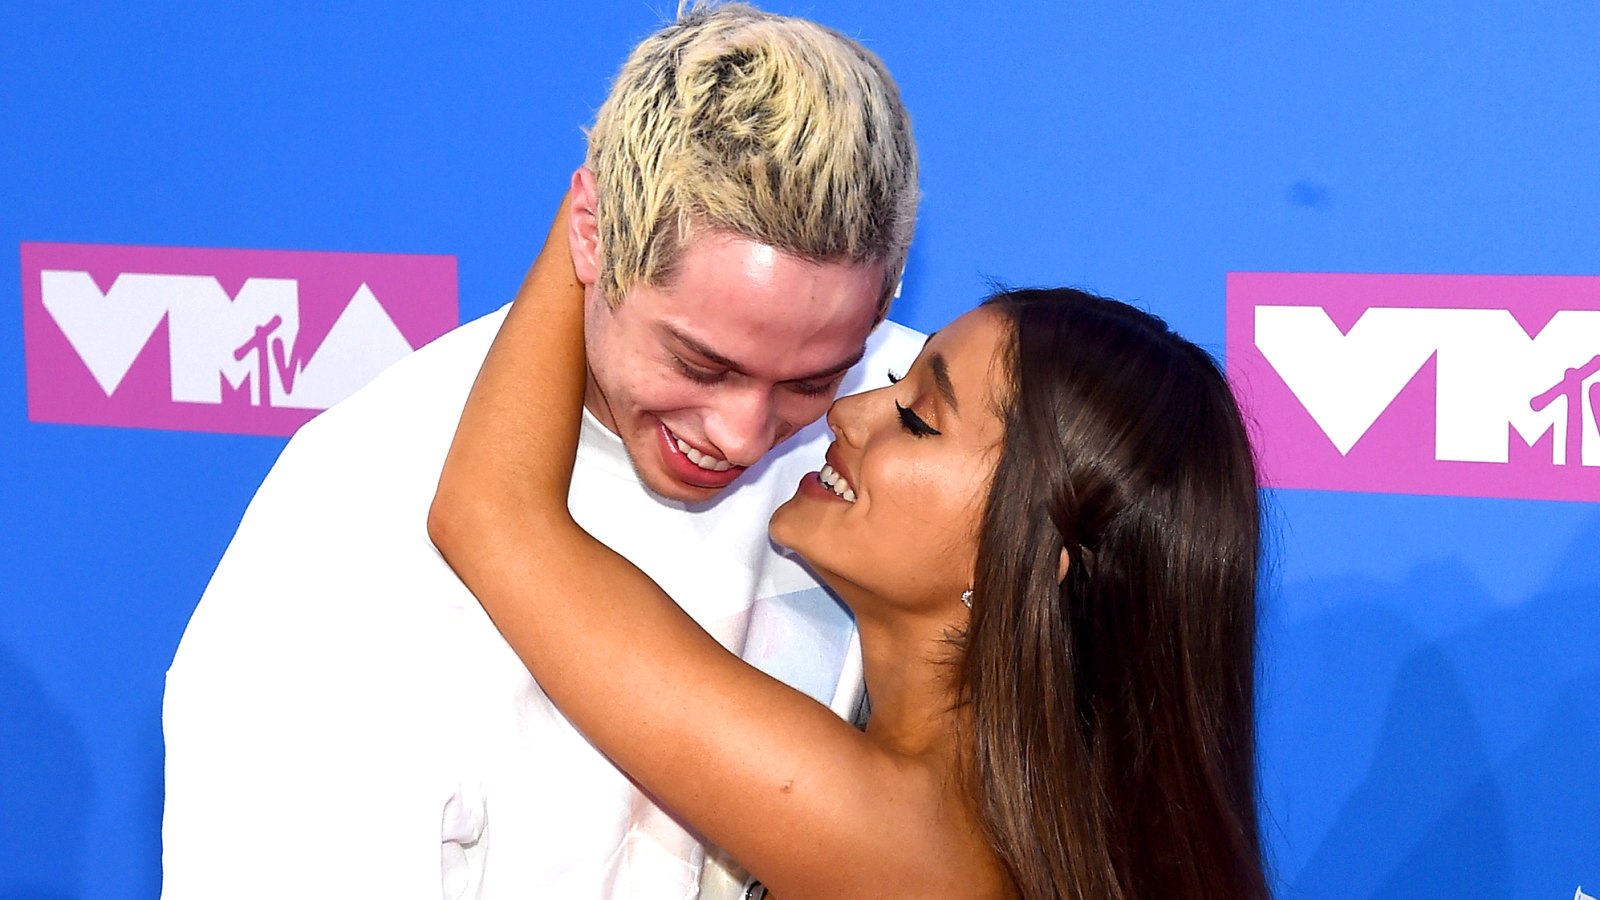 Hot Ariana Grande Porn - Pete Davidson Faces Backlash, Fans Accuse Him of Objectifying Ariana Grande